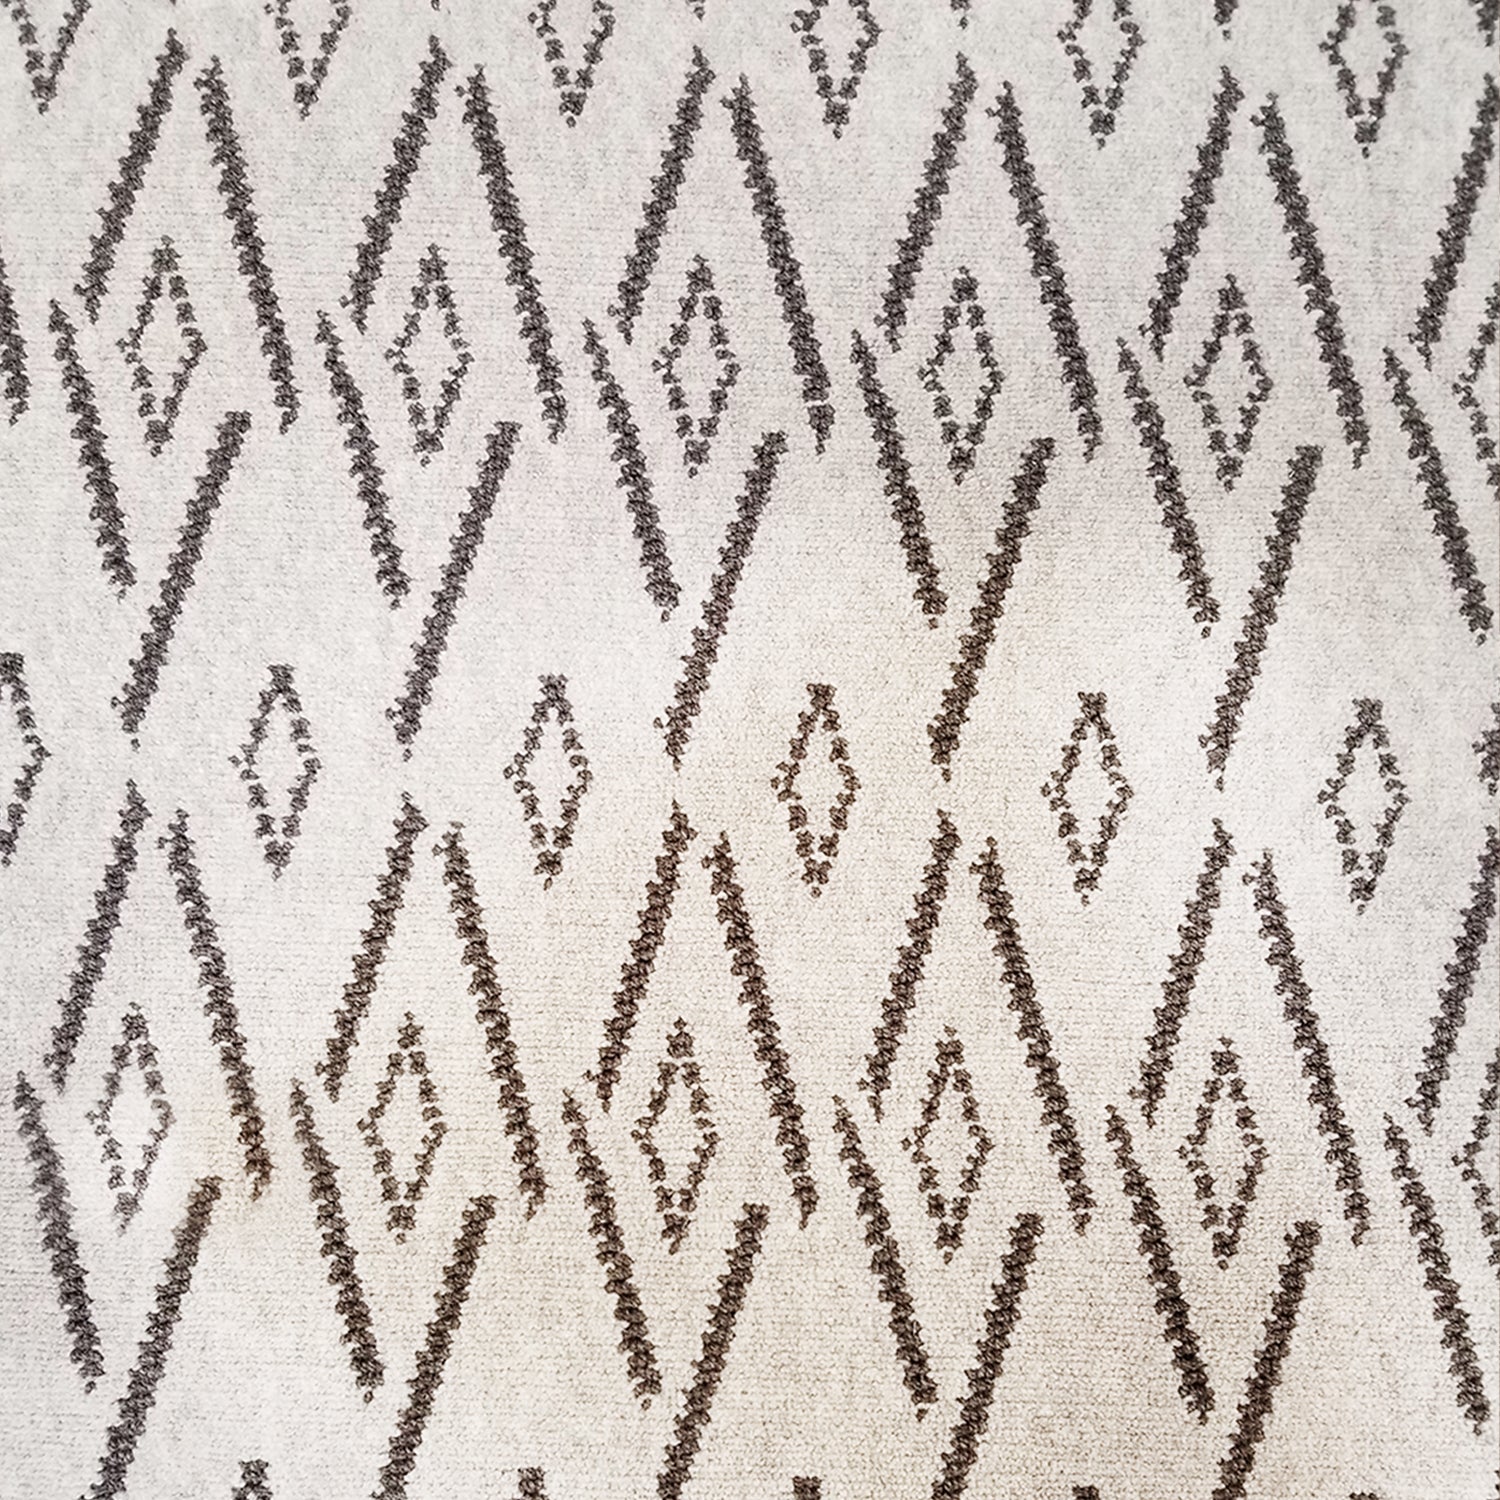 Woven broadloom carpet swatch in a repeating irregular diamond pattern in charcoal on a tan field.